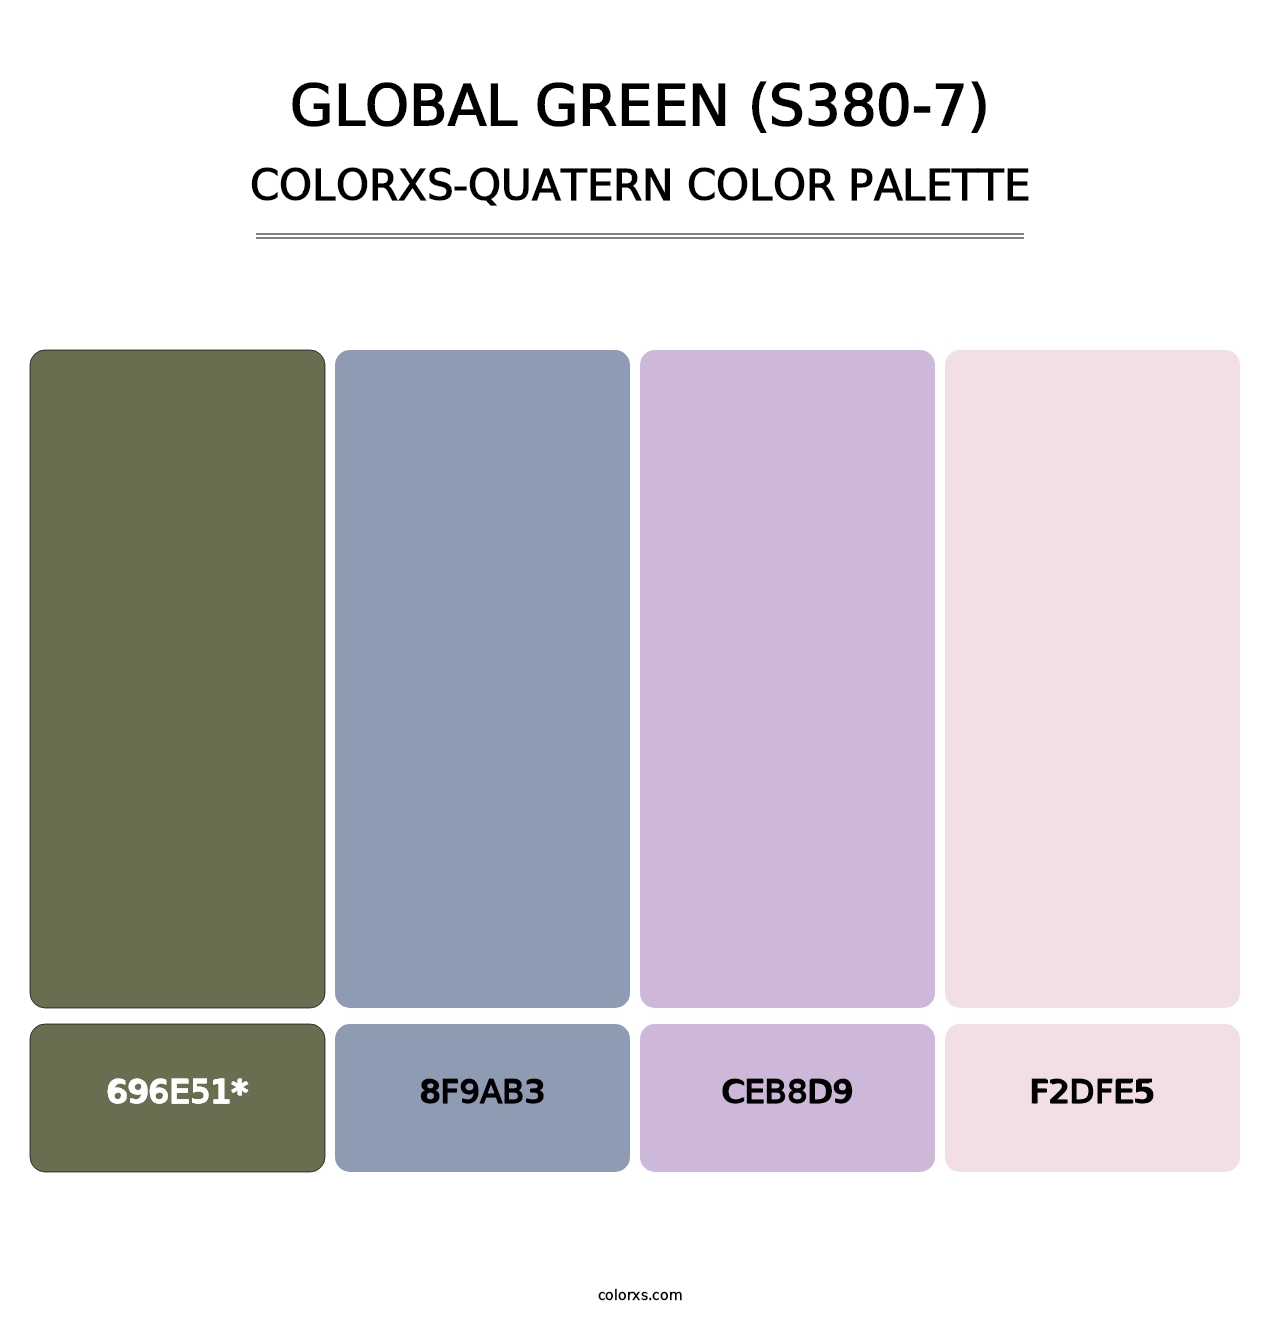 Global Green (S380-7) - Colorxs Quatern Palette